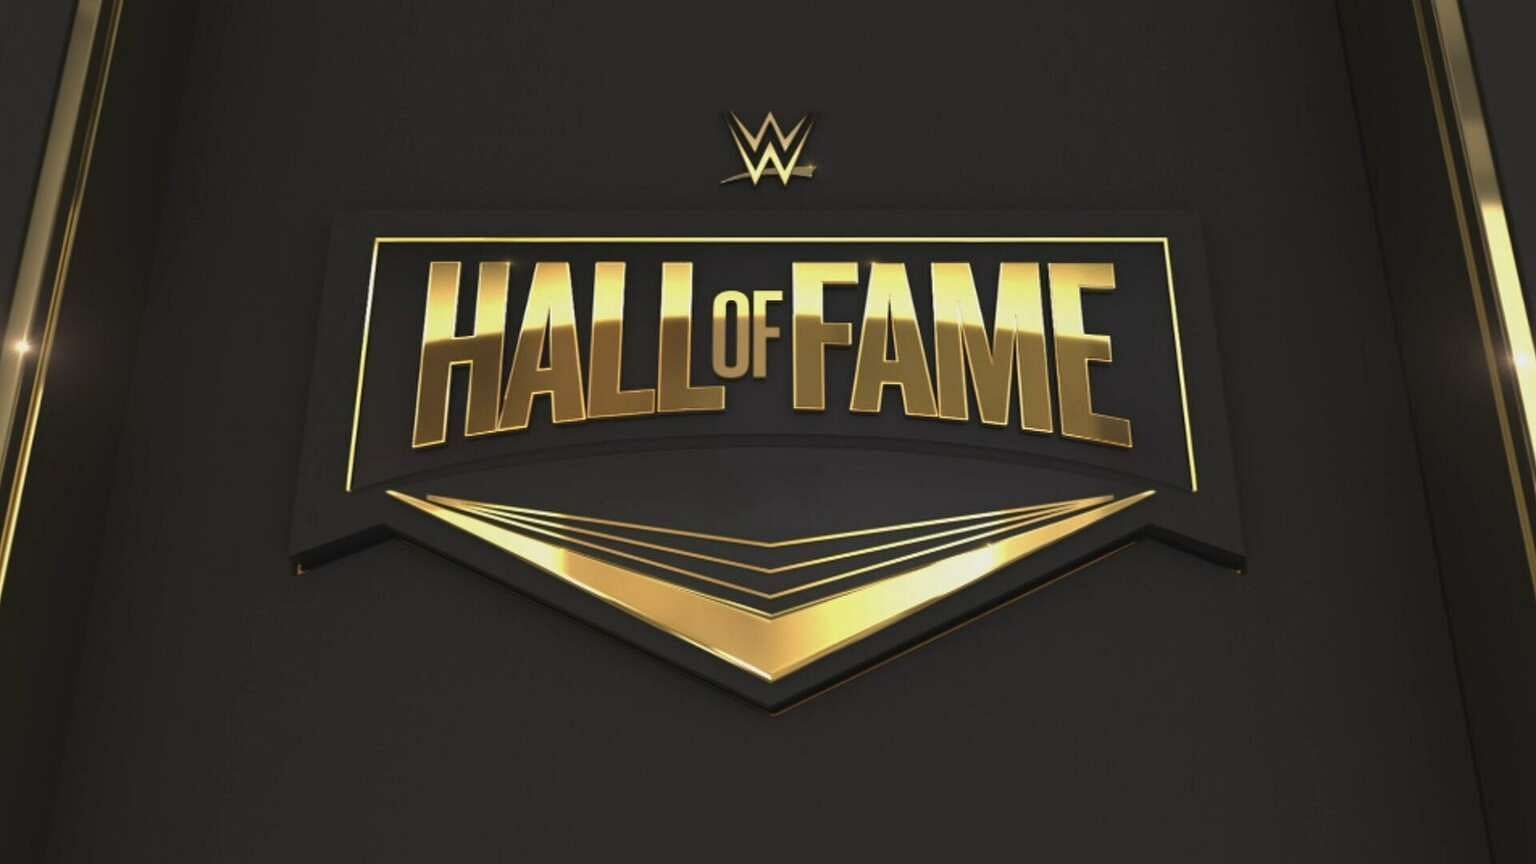 WWE Hall of Fame is one of the most special nights of the year